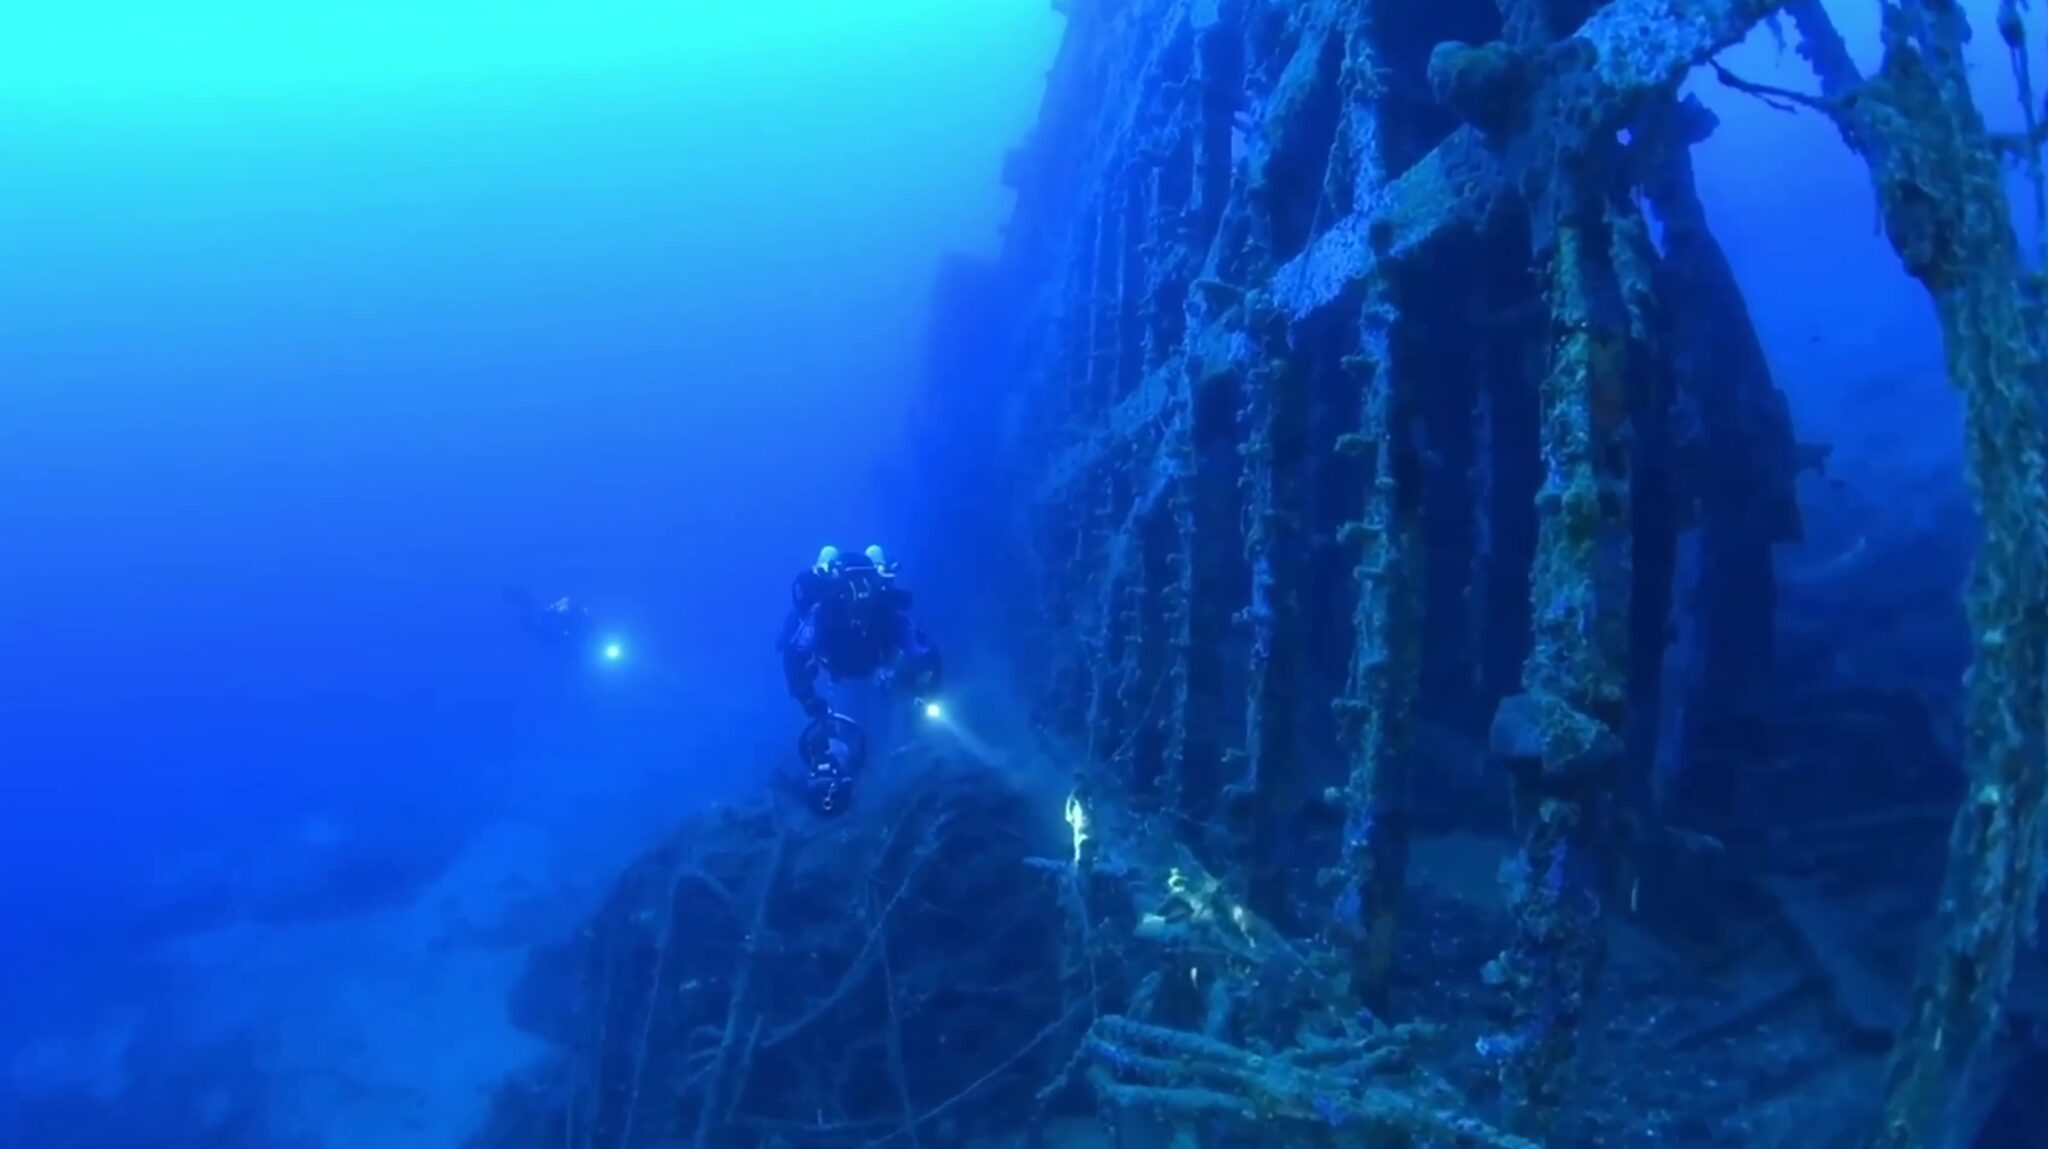 The photograph shows the bow of the Patris shipwreck in Kea, Greece